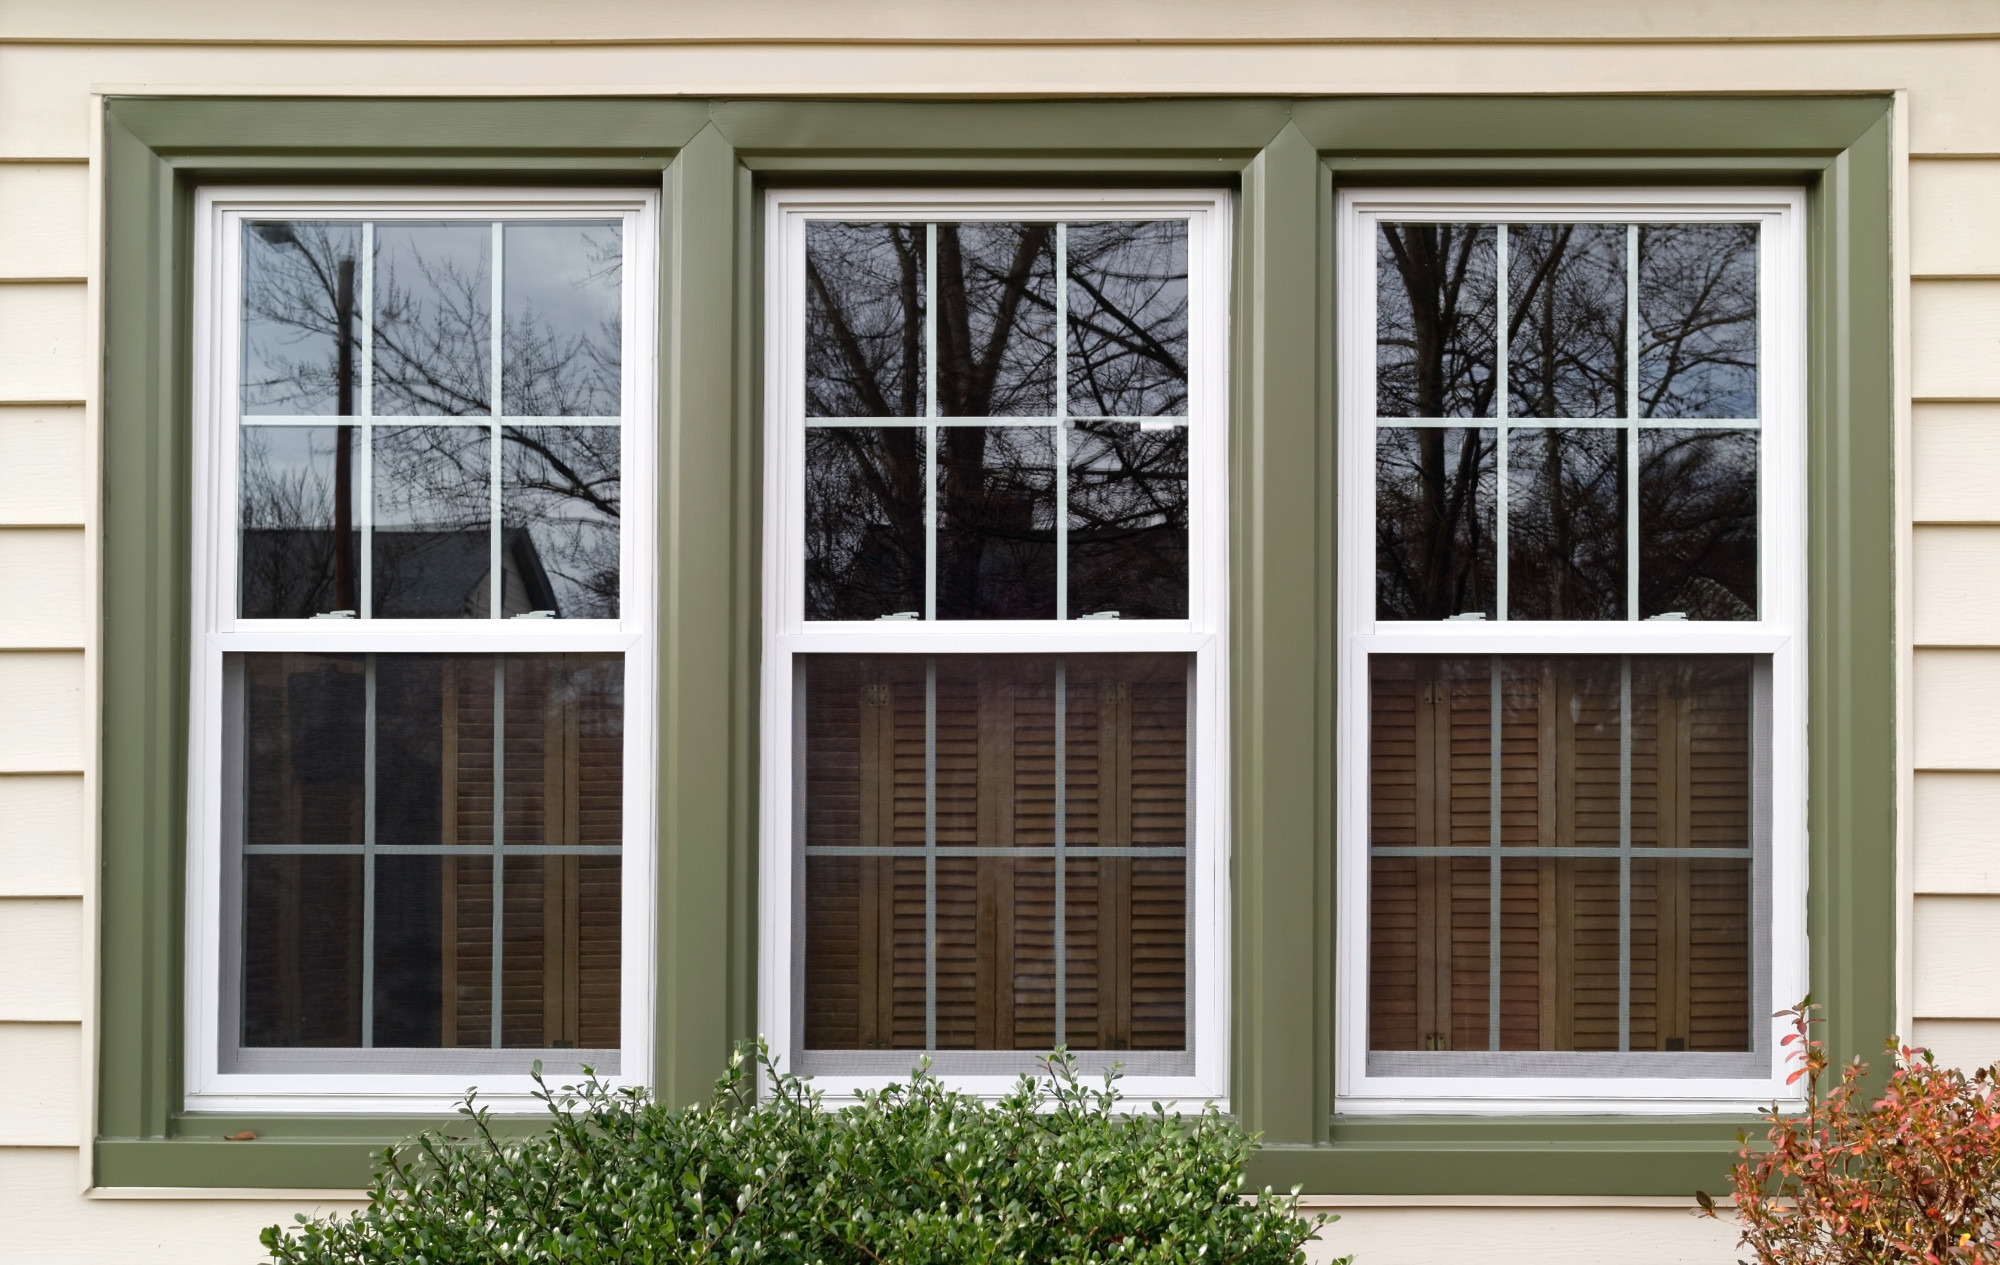 7 Reasons to Add Window Tint to Your Home